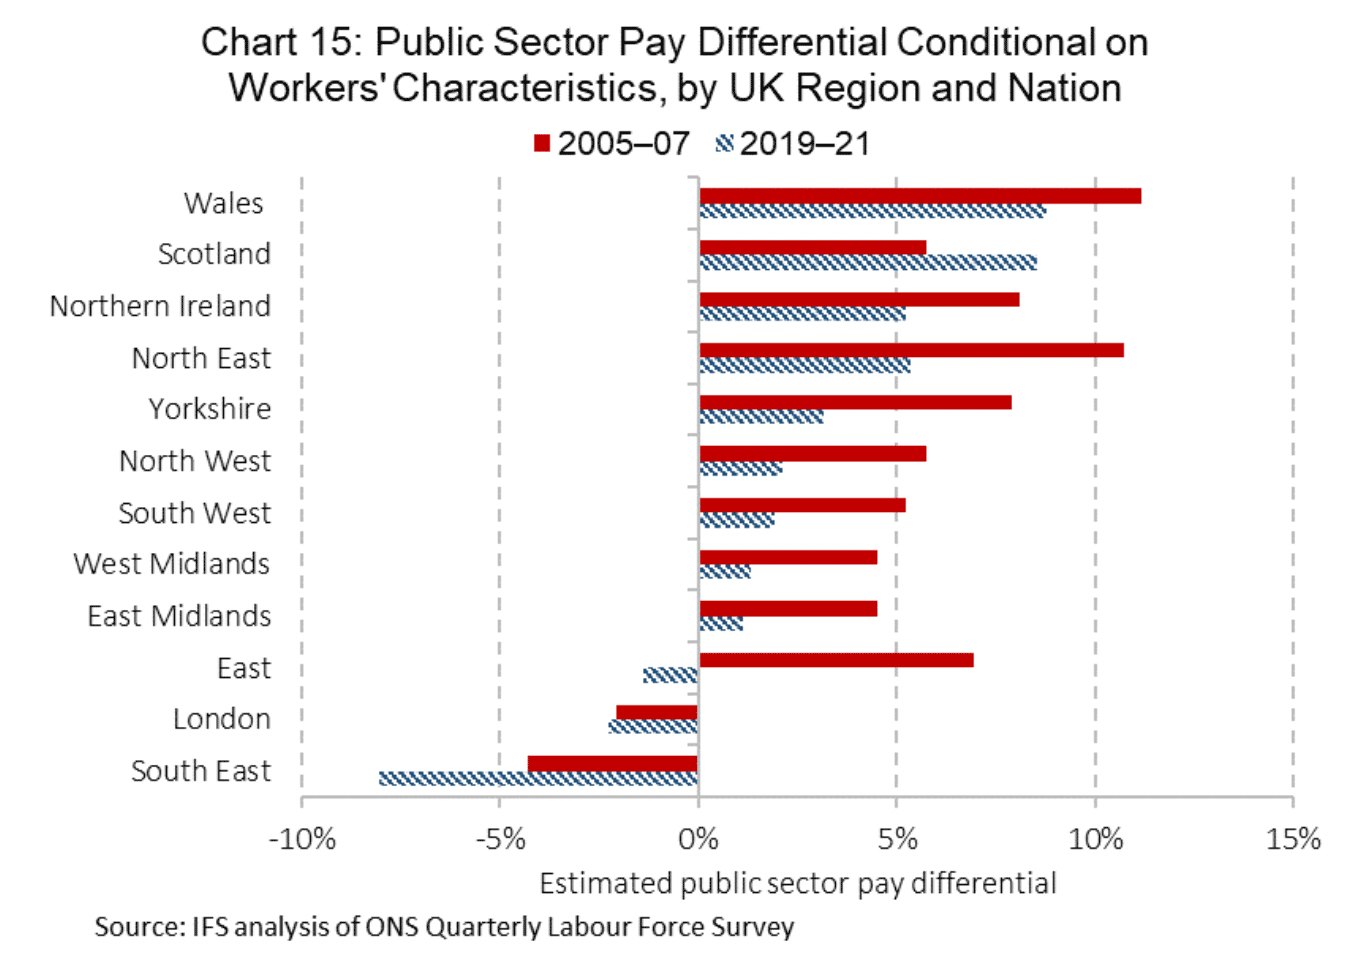 A chart showing the gap between average public and private sector pay, after controlling for workers' characteristics, for the countries and regions of the UK, for 2005-07 to 2019-21. Public sector workers earn more than in the private sector in all regions apart from London, the South East, and East of England. Scotland is the only region to have seen an increase in the gap over time.